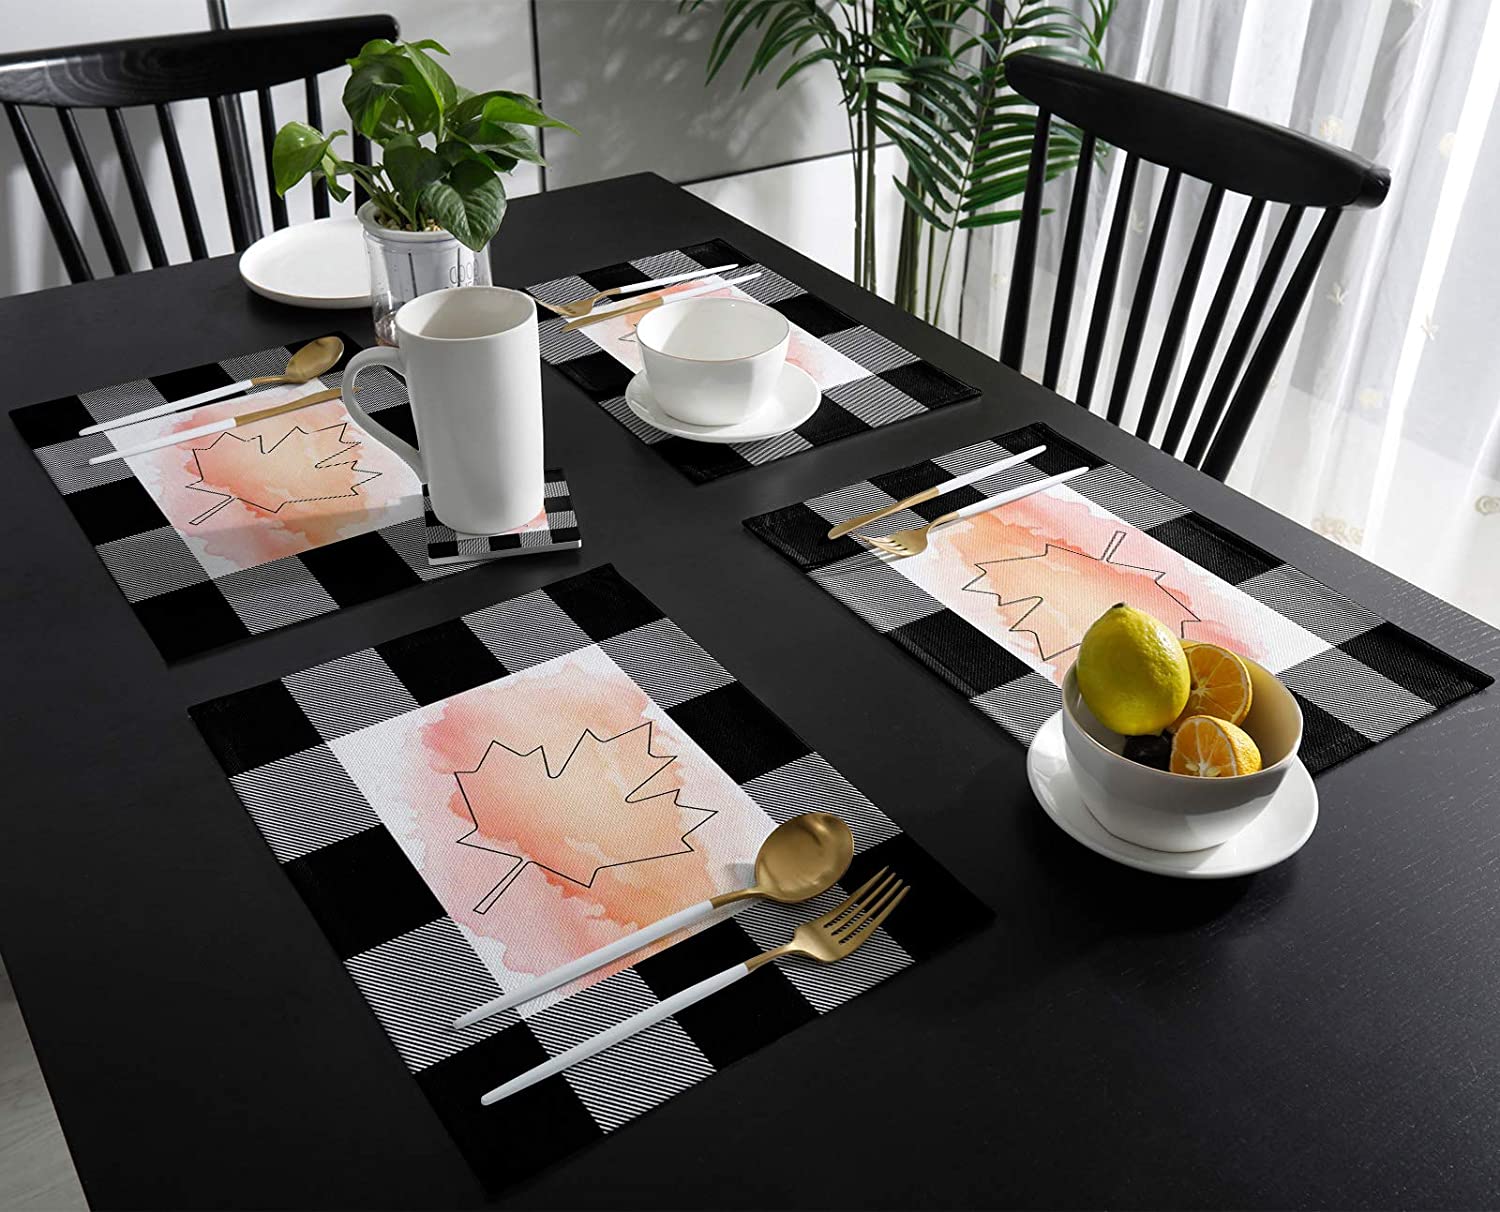 Best Kitchen Place Mats - Table PlaceMats - Mats For Kitchen